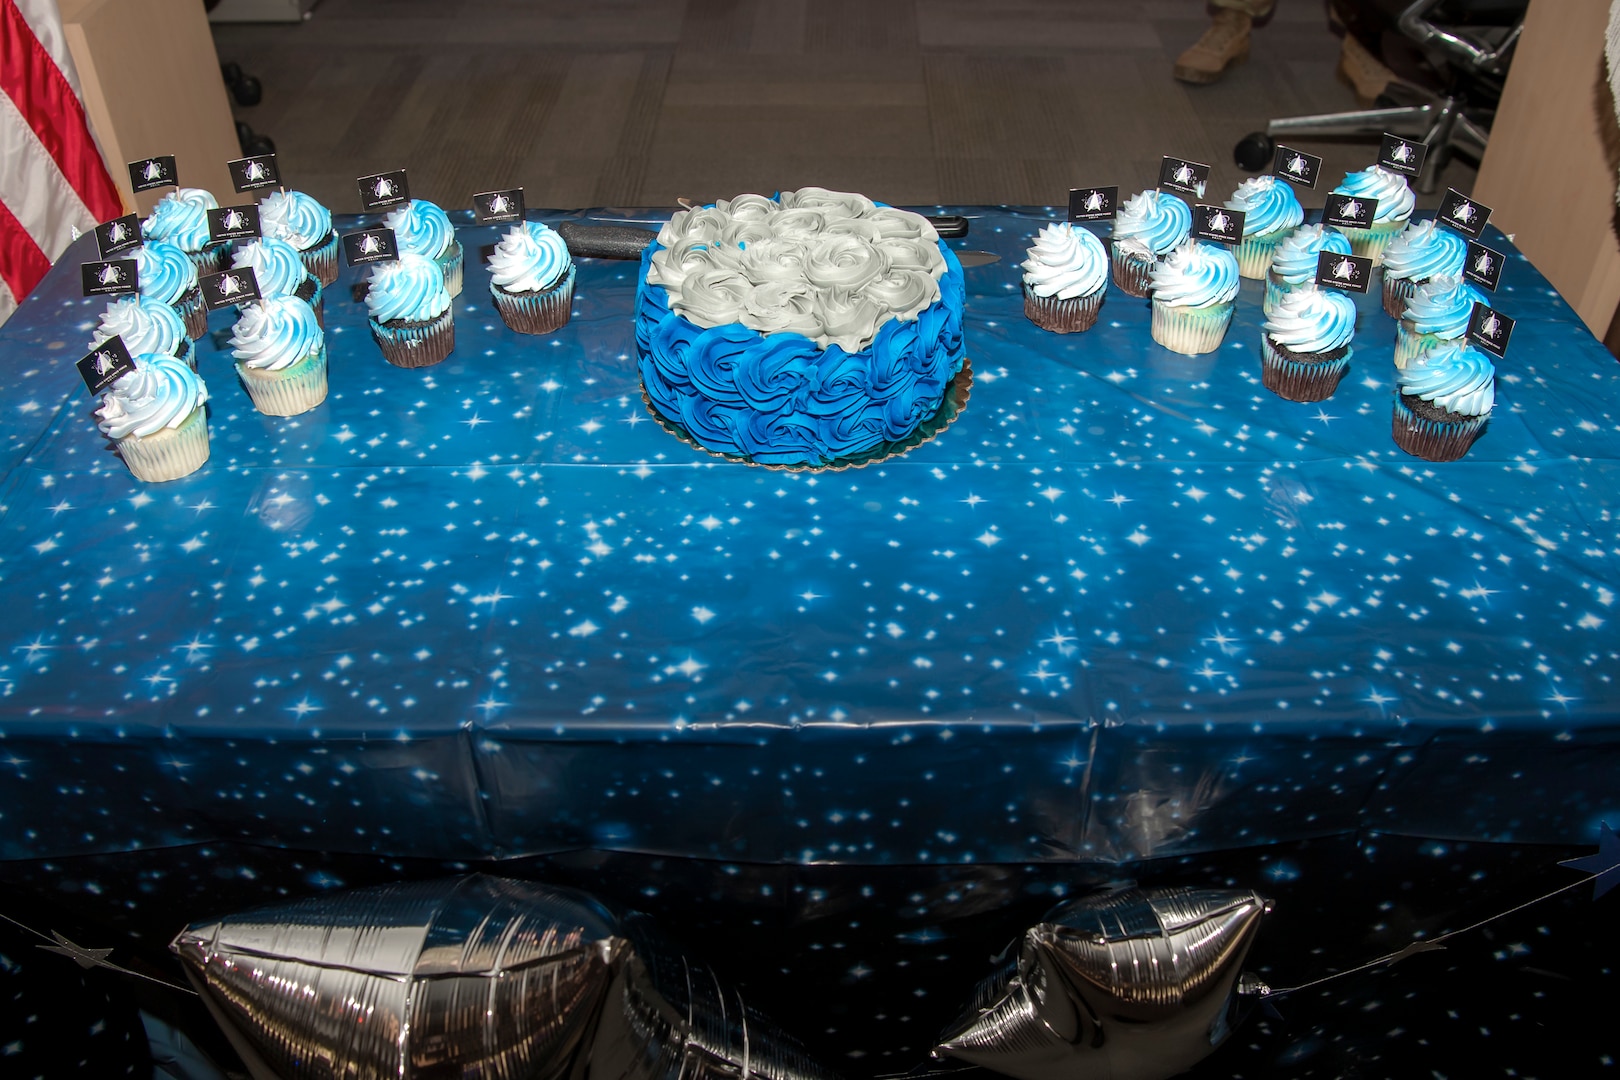 Cake and cupcakes sit on top of galaxy table cloth